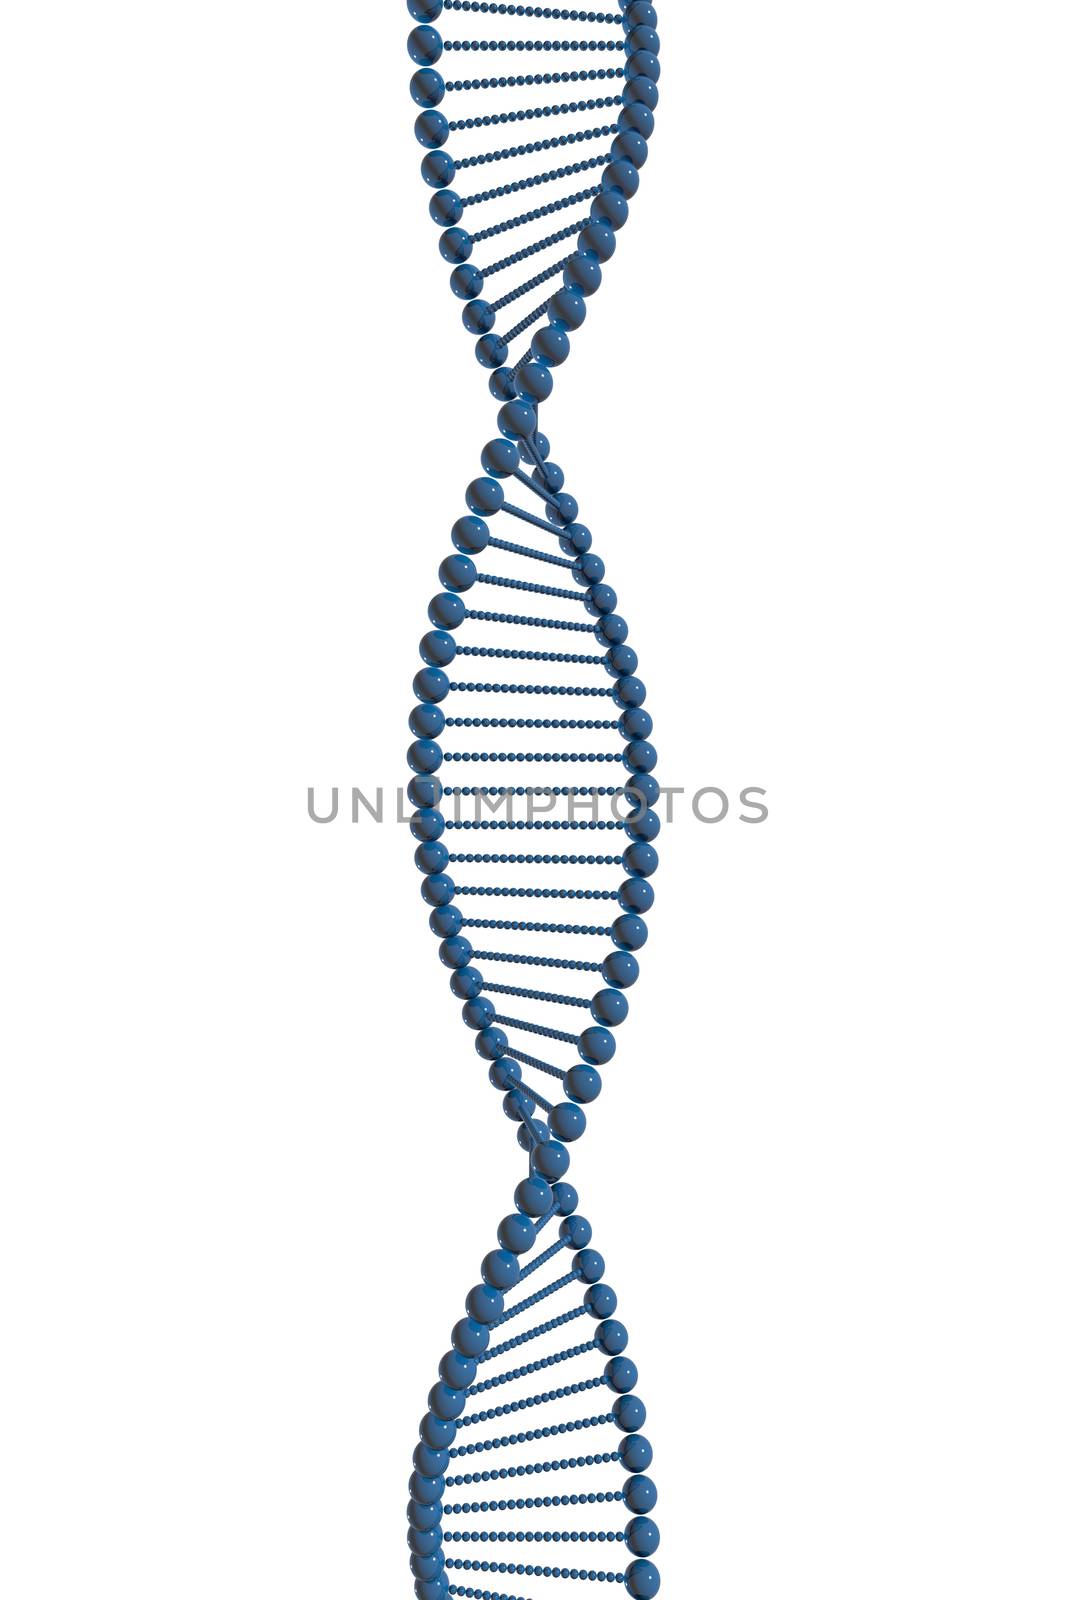 Isolated DNA by hyrons